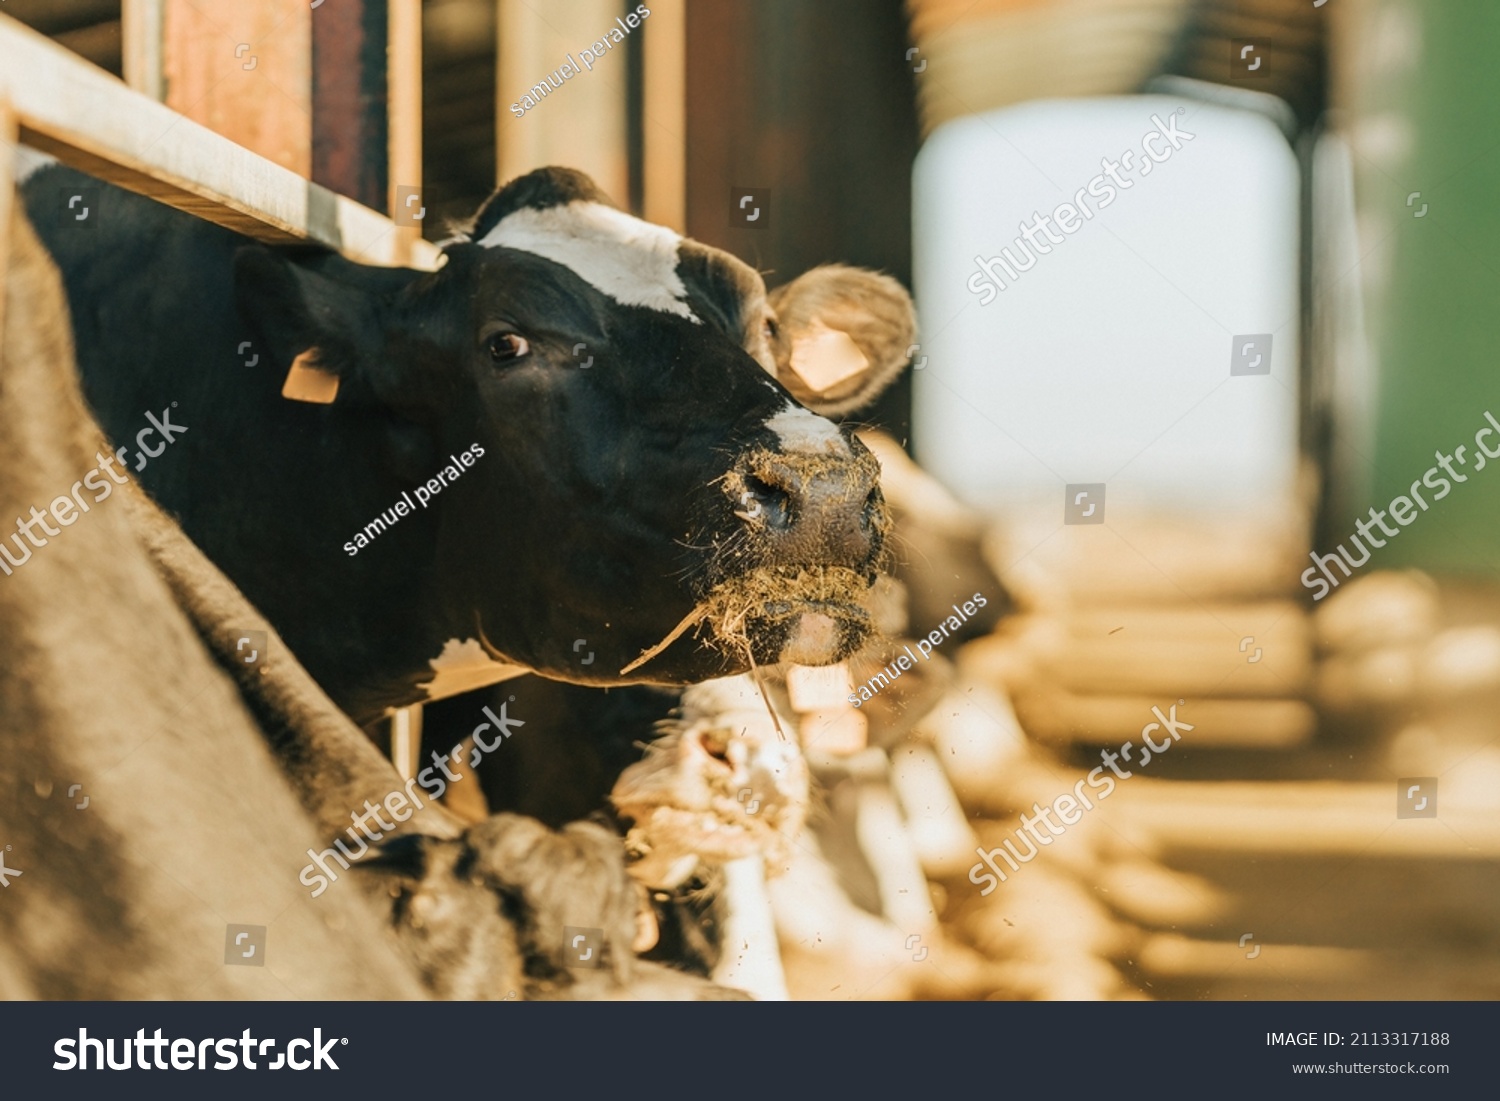 cow looks at camera while ruminating on feed #2113317188